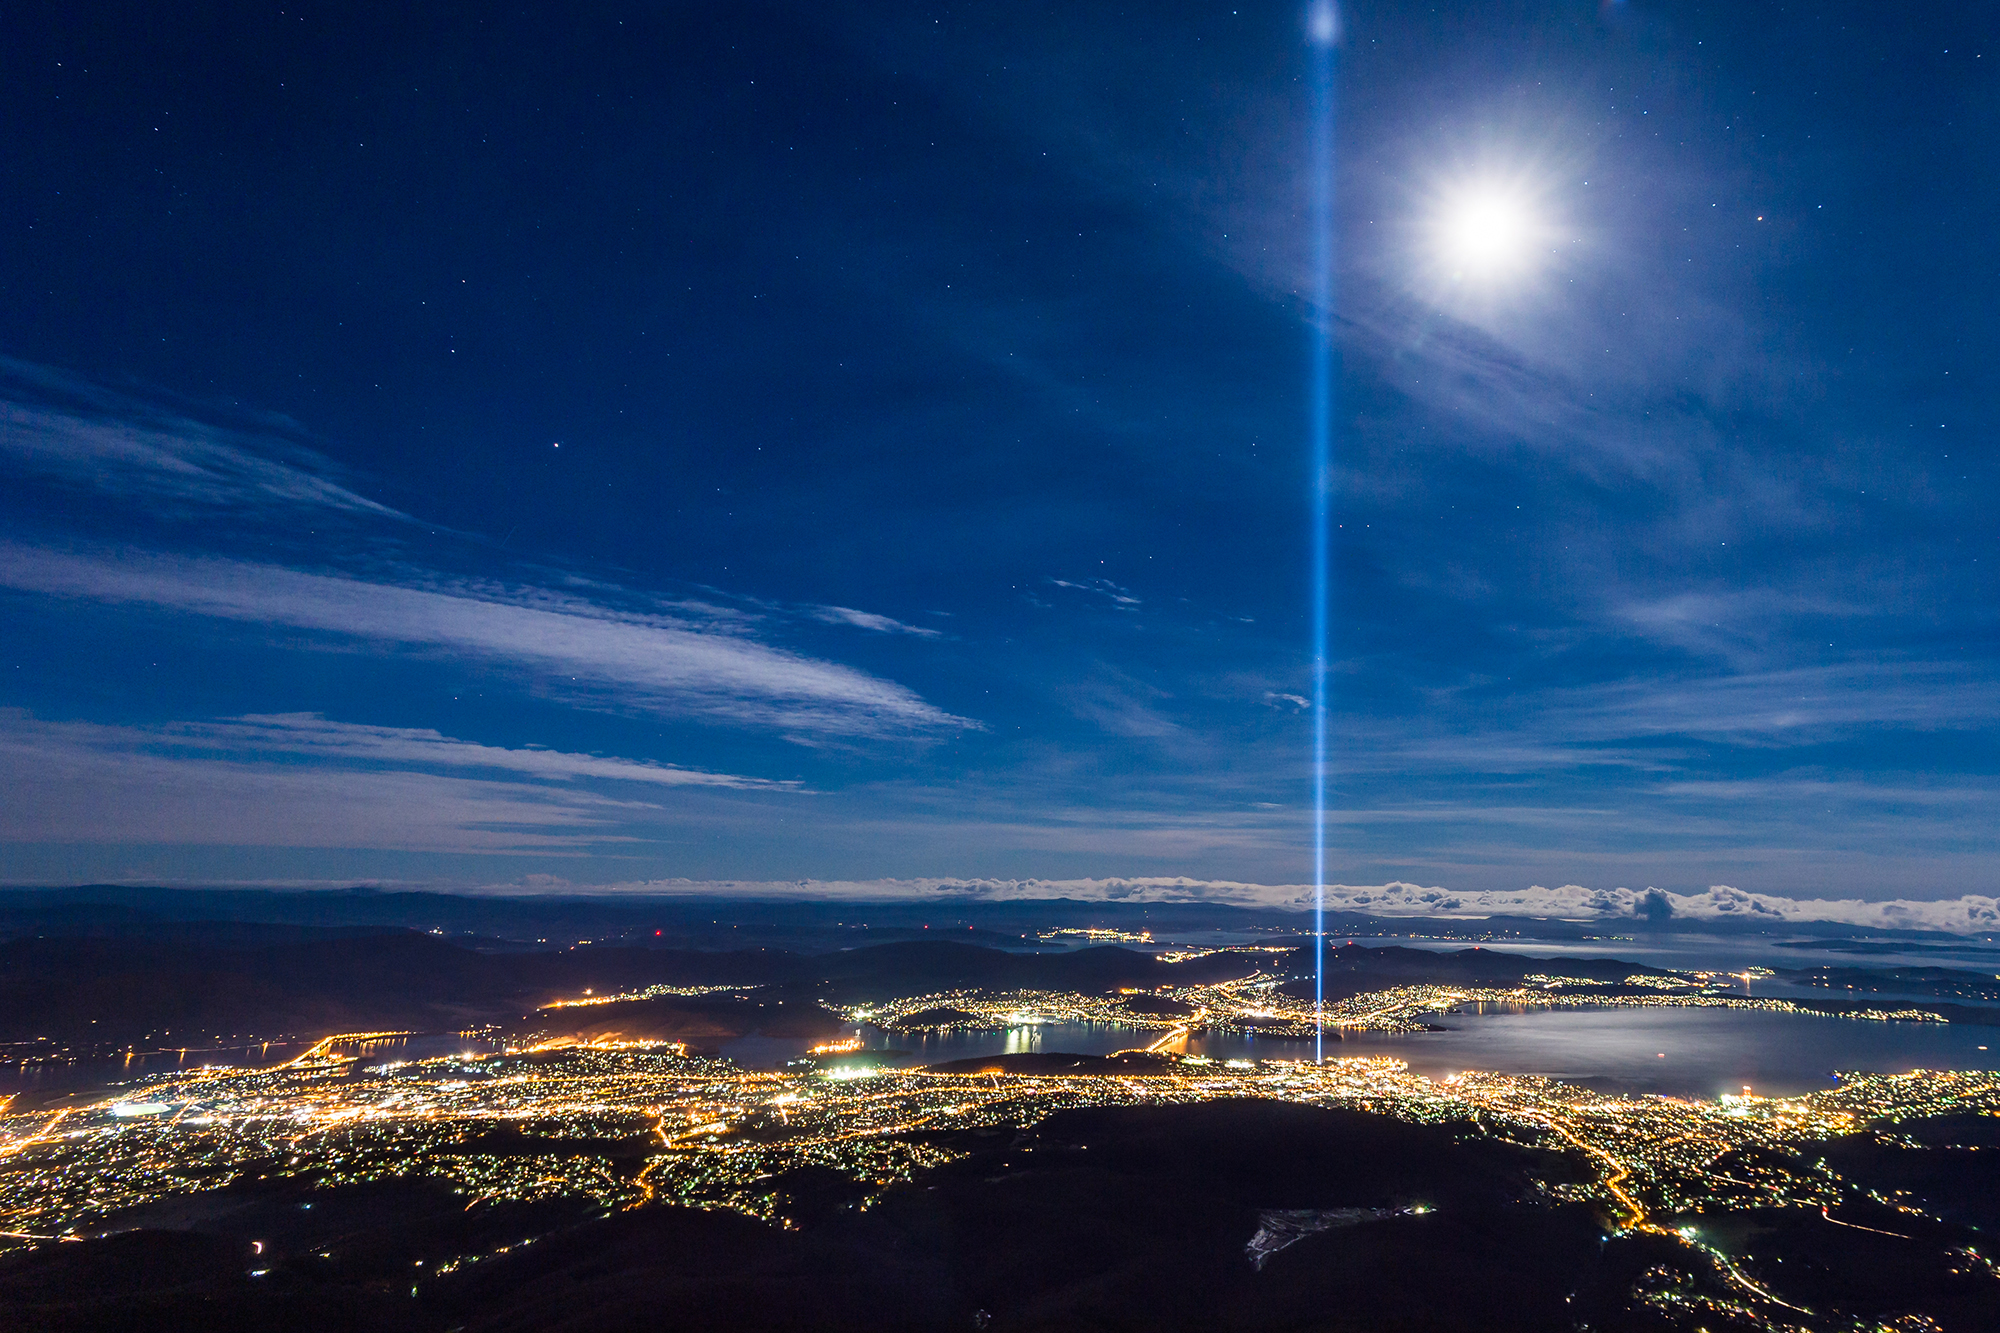 View of Hobart, Tasmania from Mt. Wellington with the Spectra light display. Spectra is a light and sound artwork installed in front of the Cenotaph that sits atop a small rise on the western shore of Hobart’s CBD.